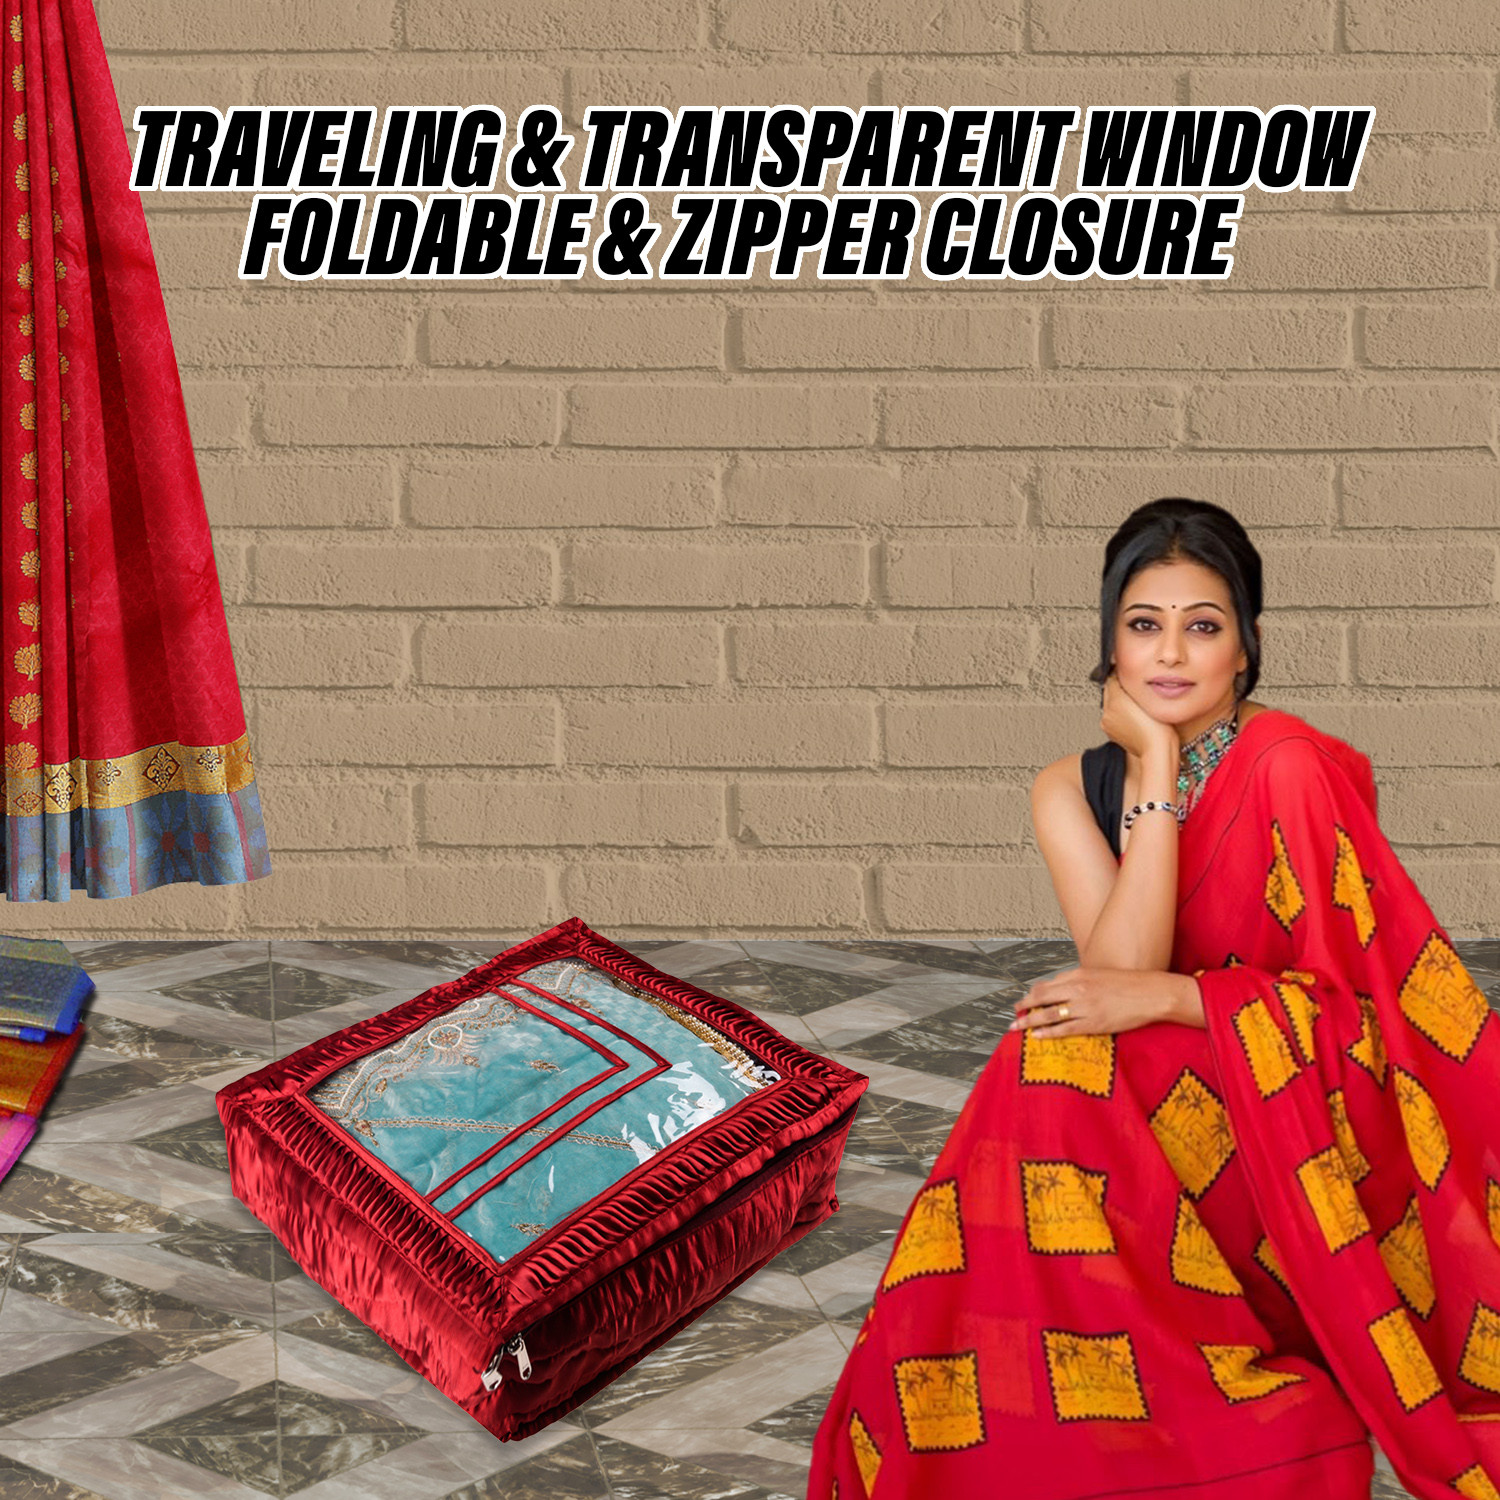 Kuber Industries Saree Cover | Soft Satin Foldable Lehanga Cover for Woman | Pleated Frill Border Clothes Storage Bag with Transparent Top | Maroon